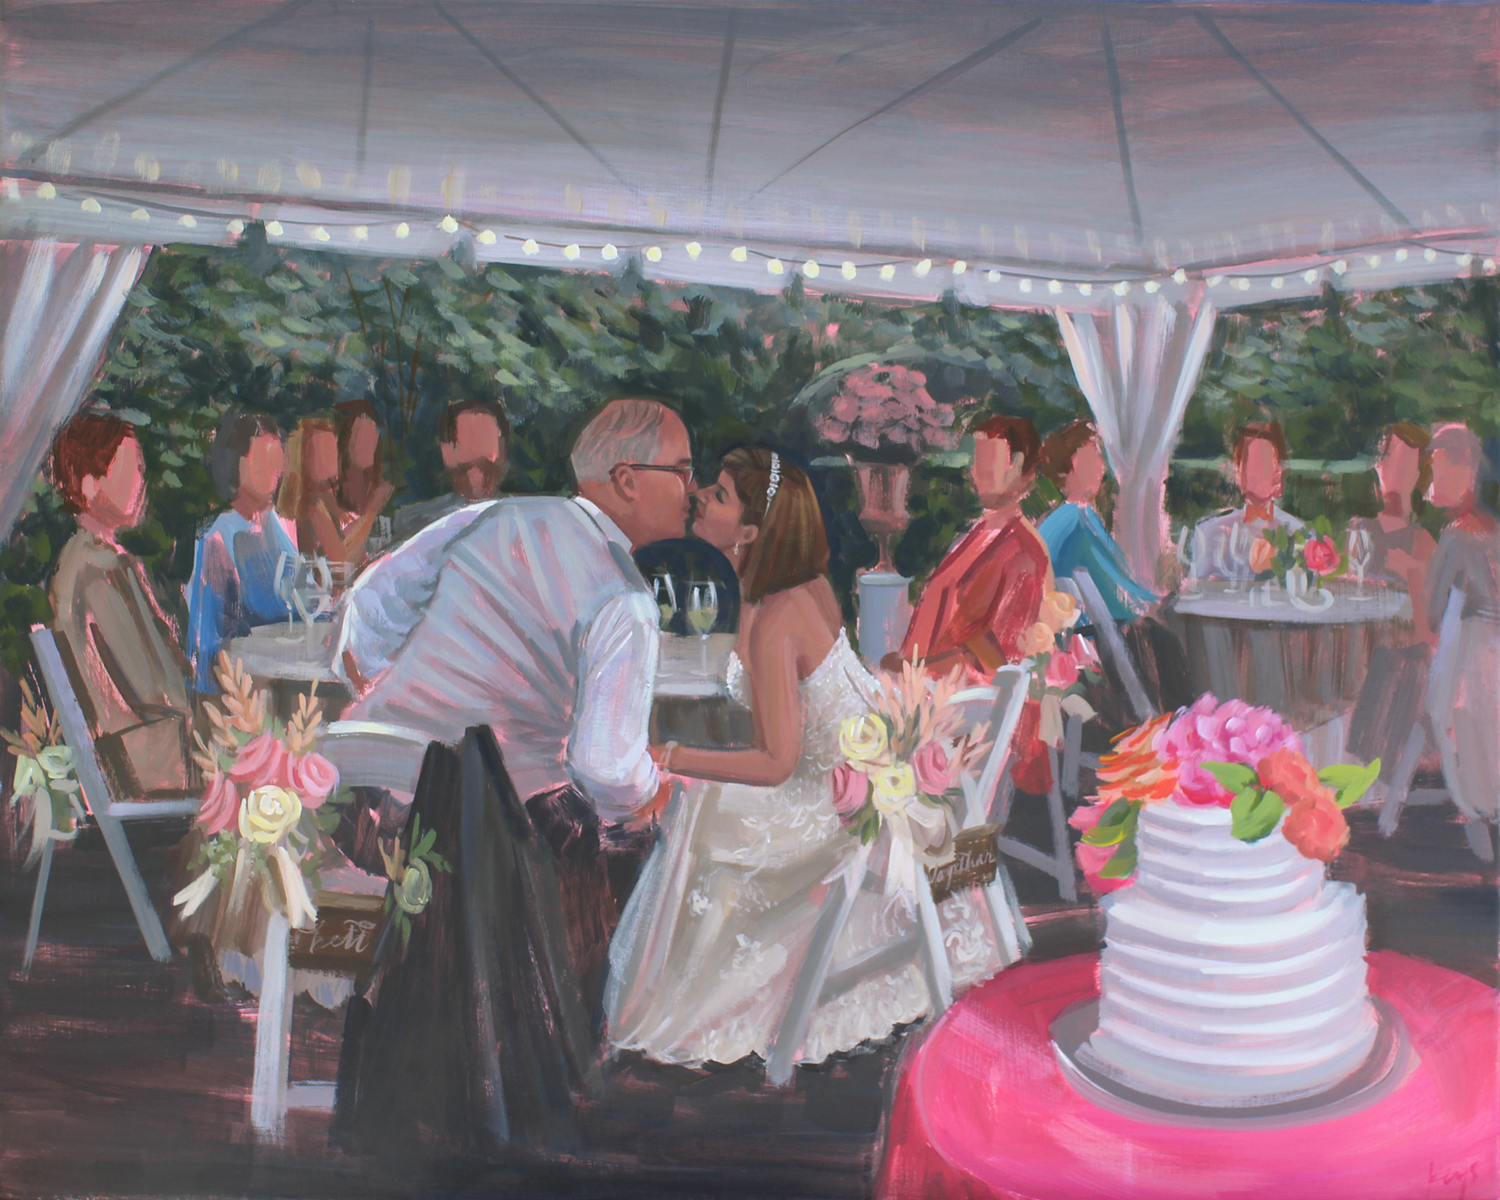 Wedding Painter, Ben Keys, created this painting for Sandra + Jim’s First Anniversary merging several of their wedding photos together.